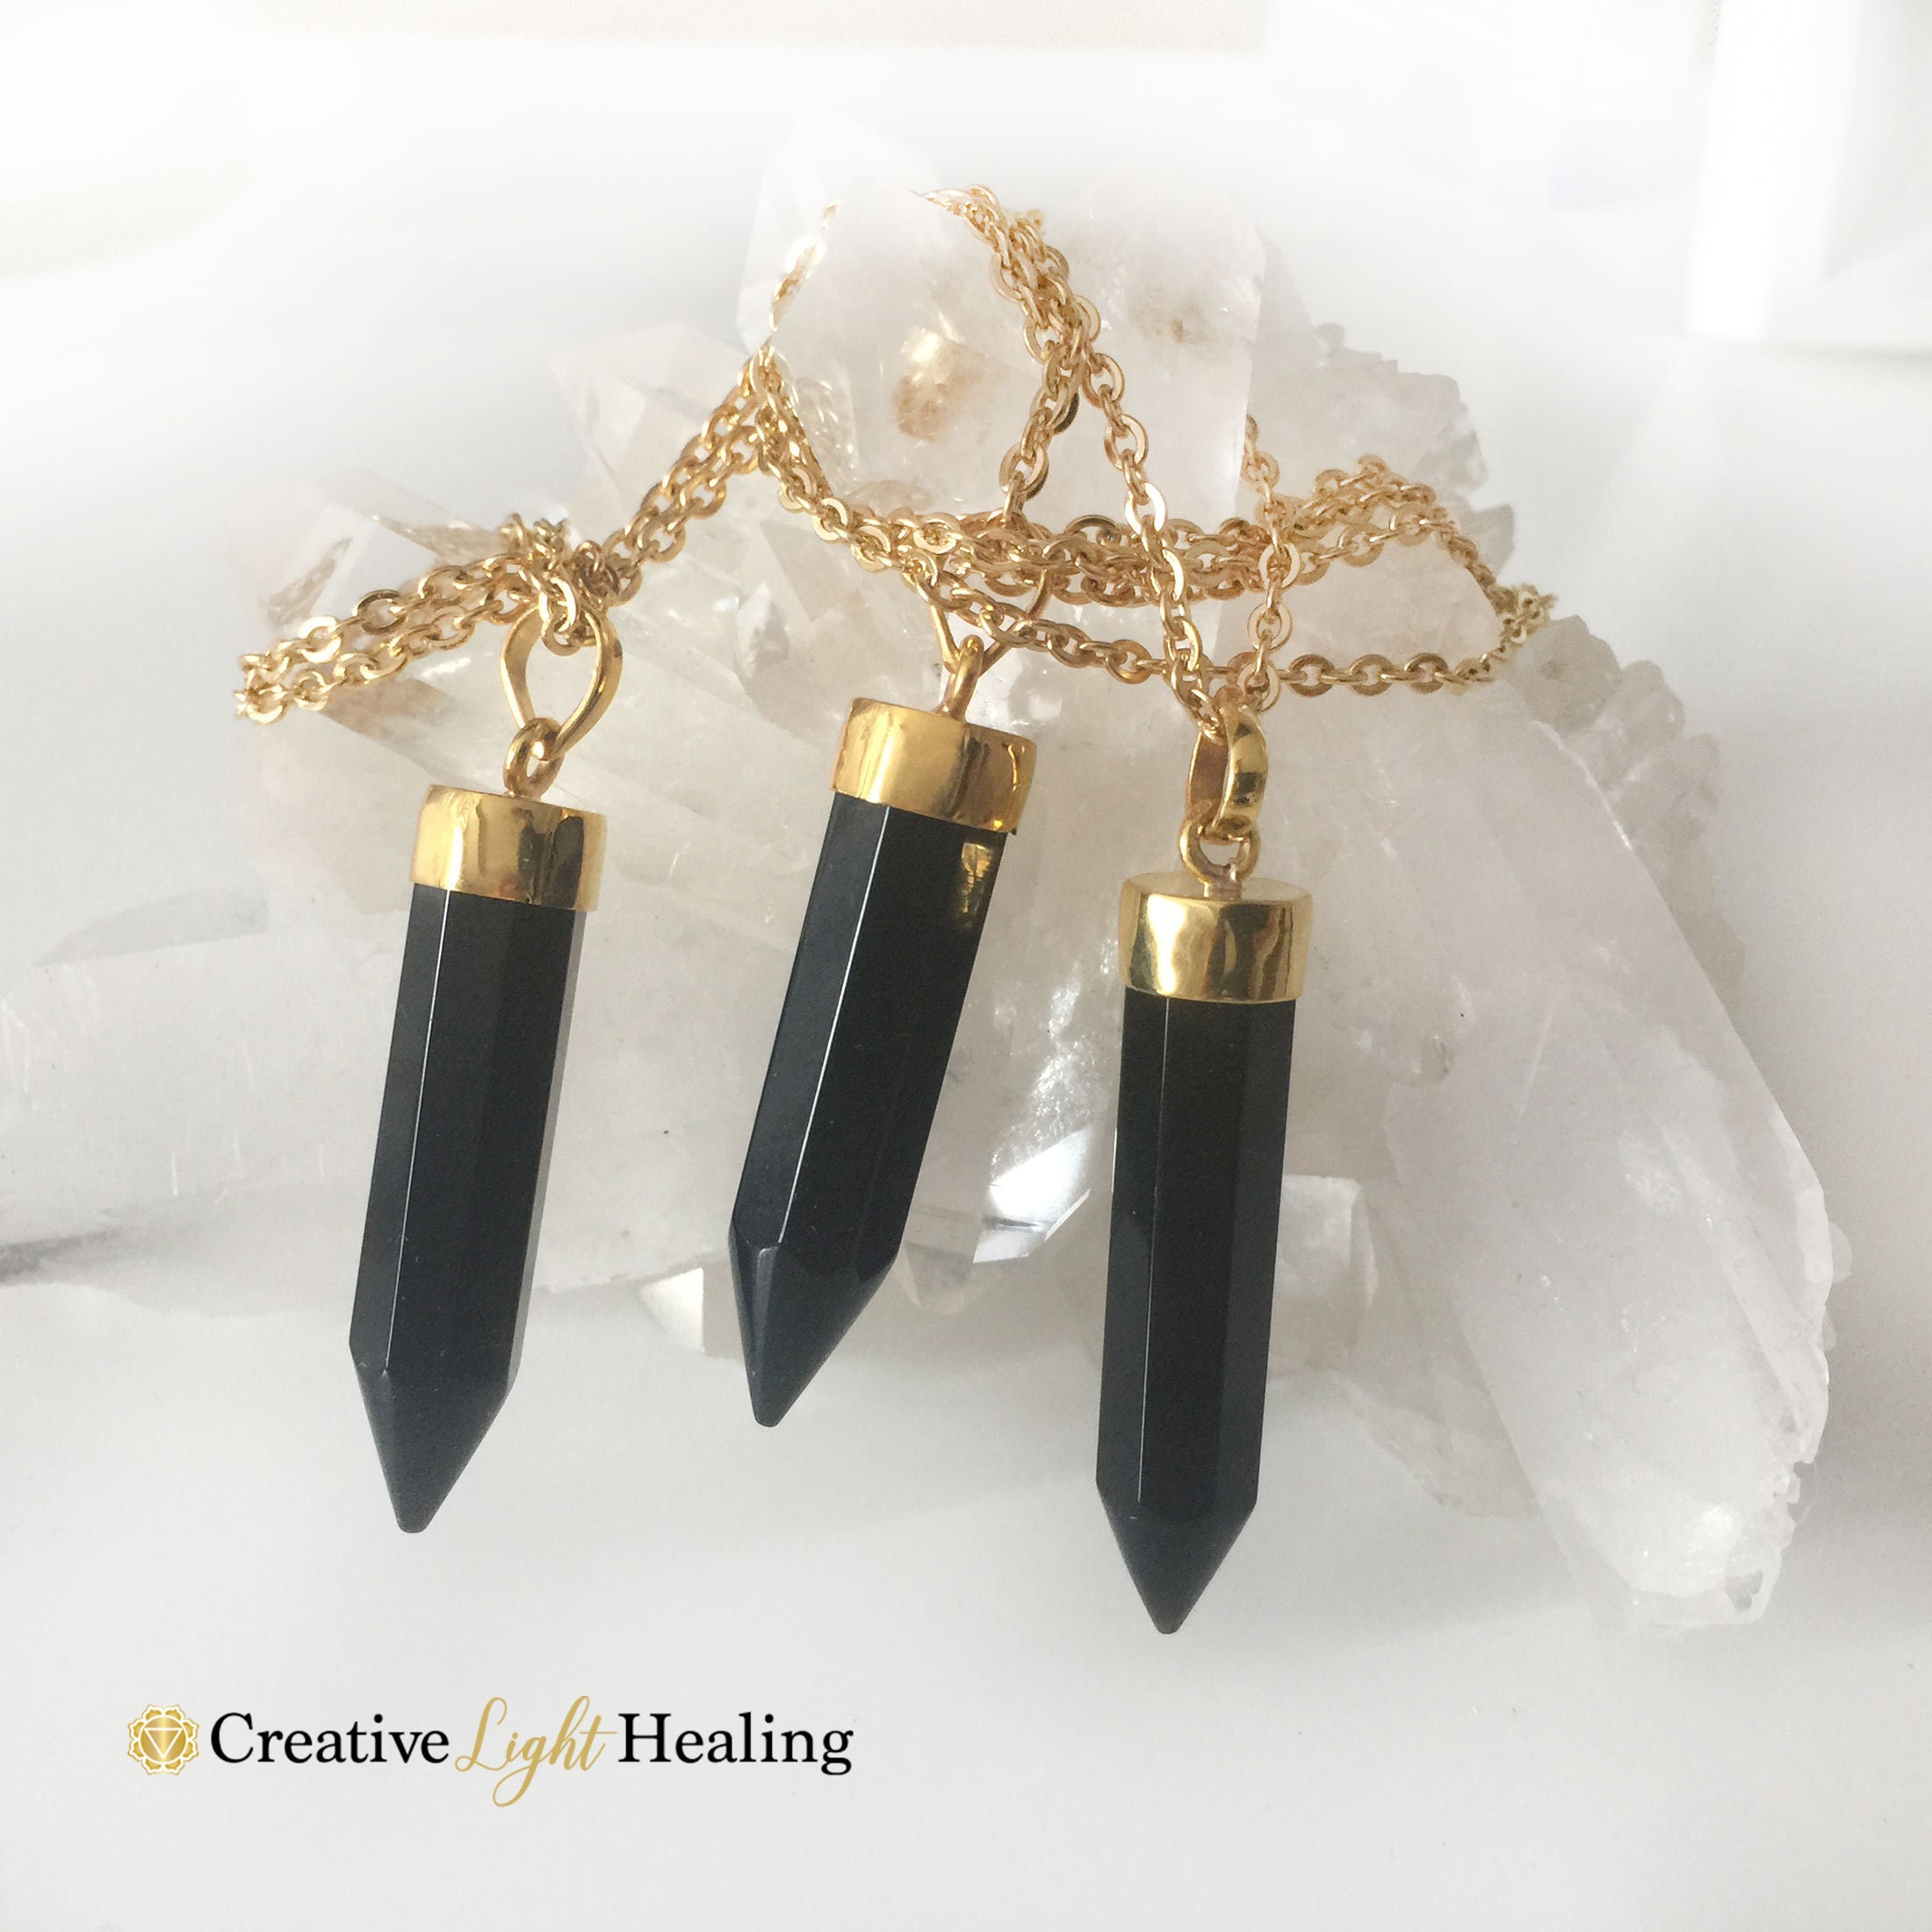 Ritual Crystal Pendant Medieval Jewelry Protection Amulet Onyx Jewelry Black Onyx Necklace black Meditation Crystal Medieval Necklace